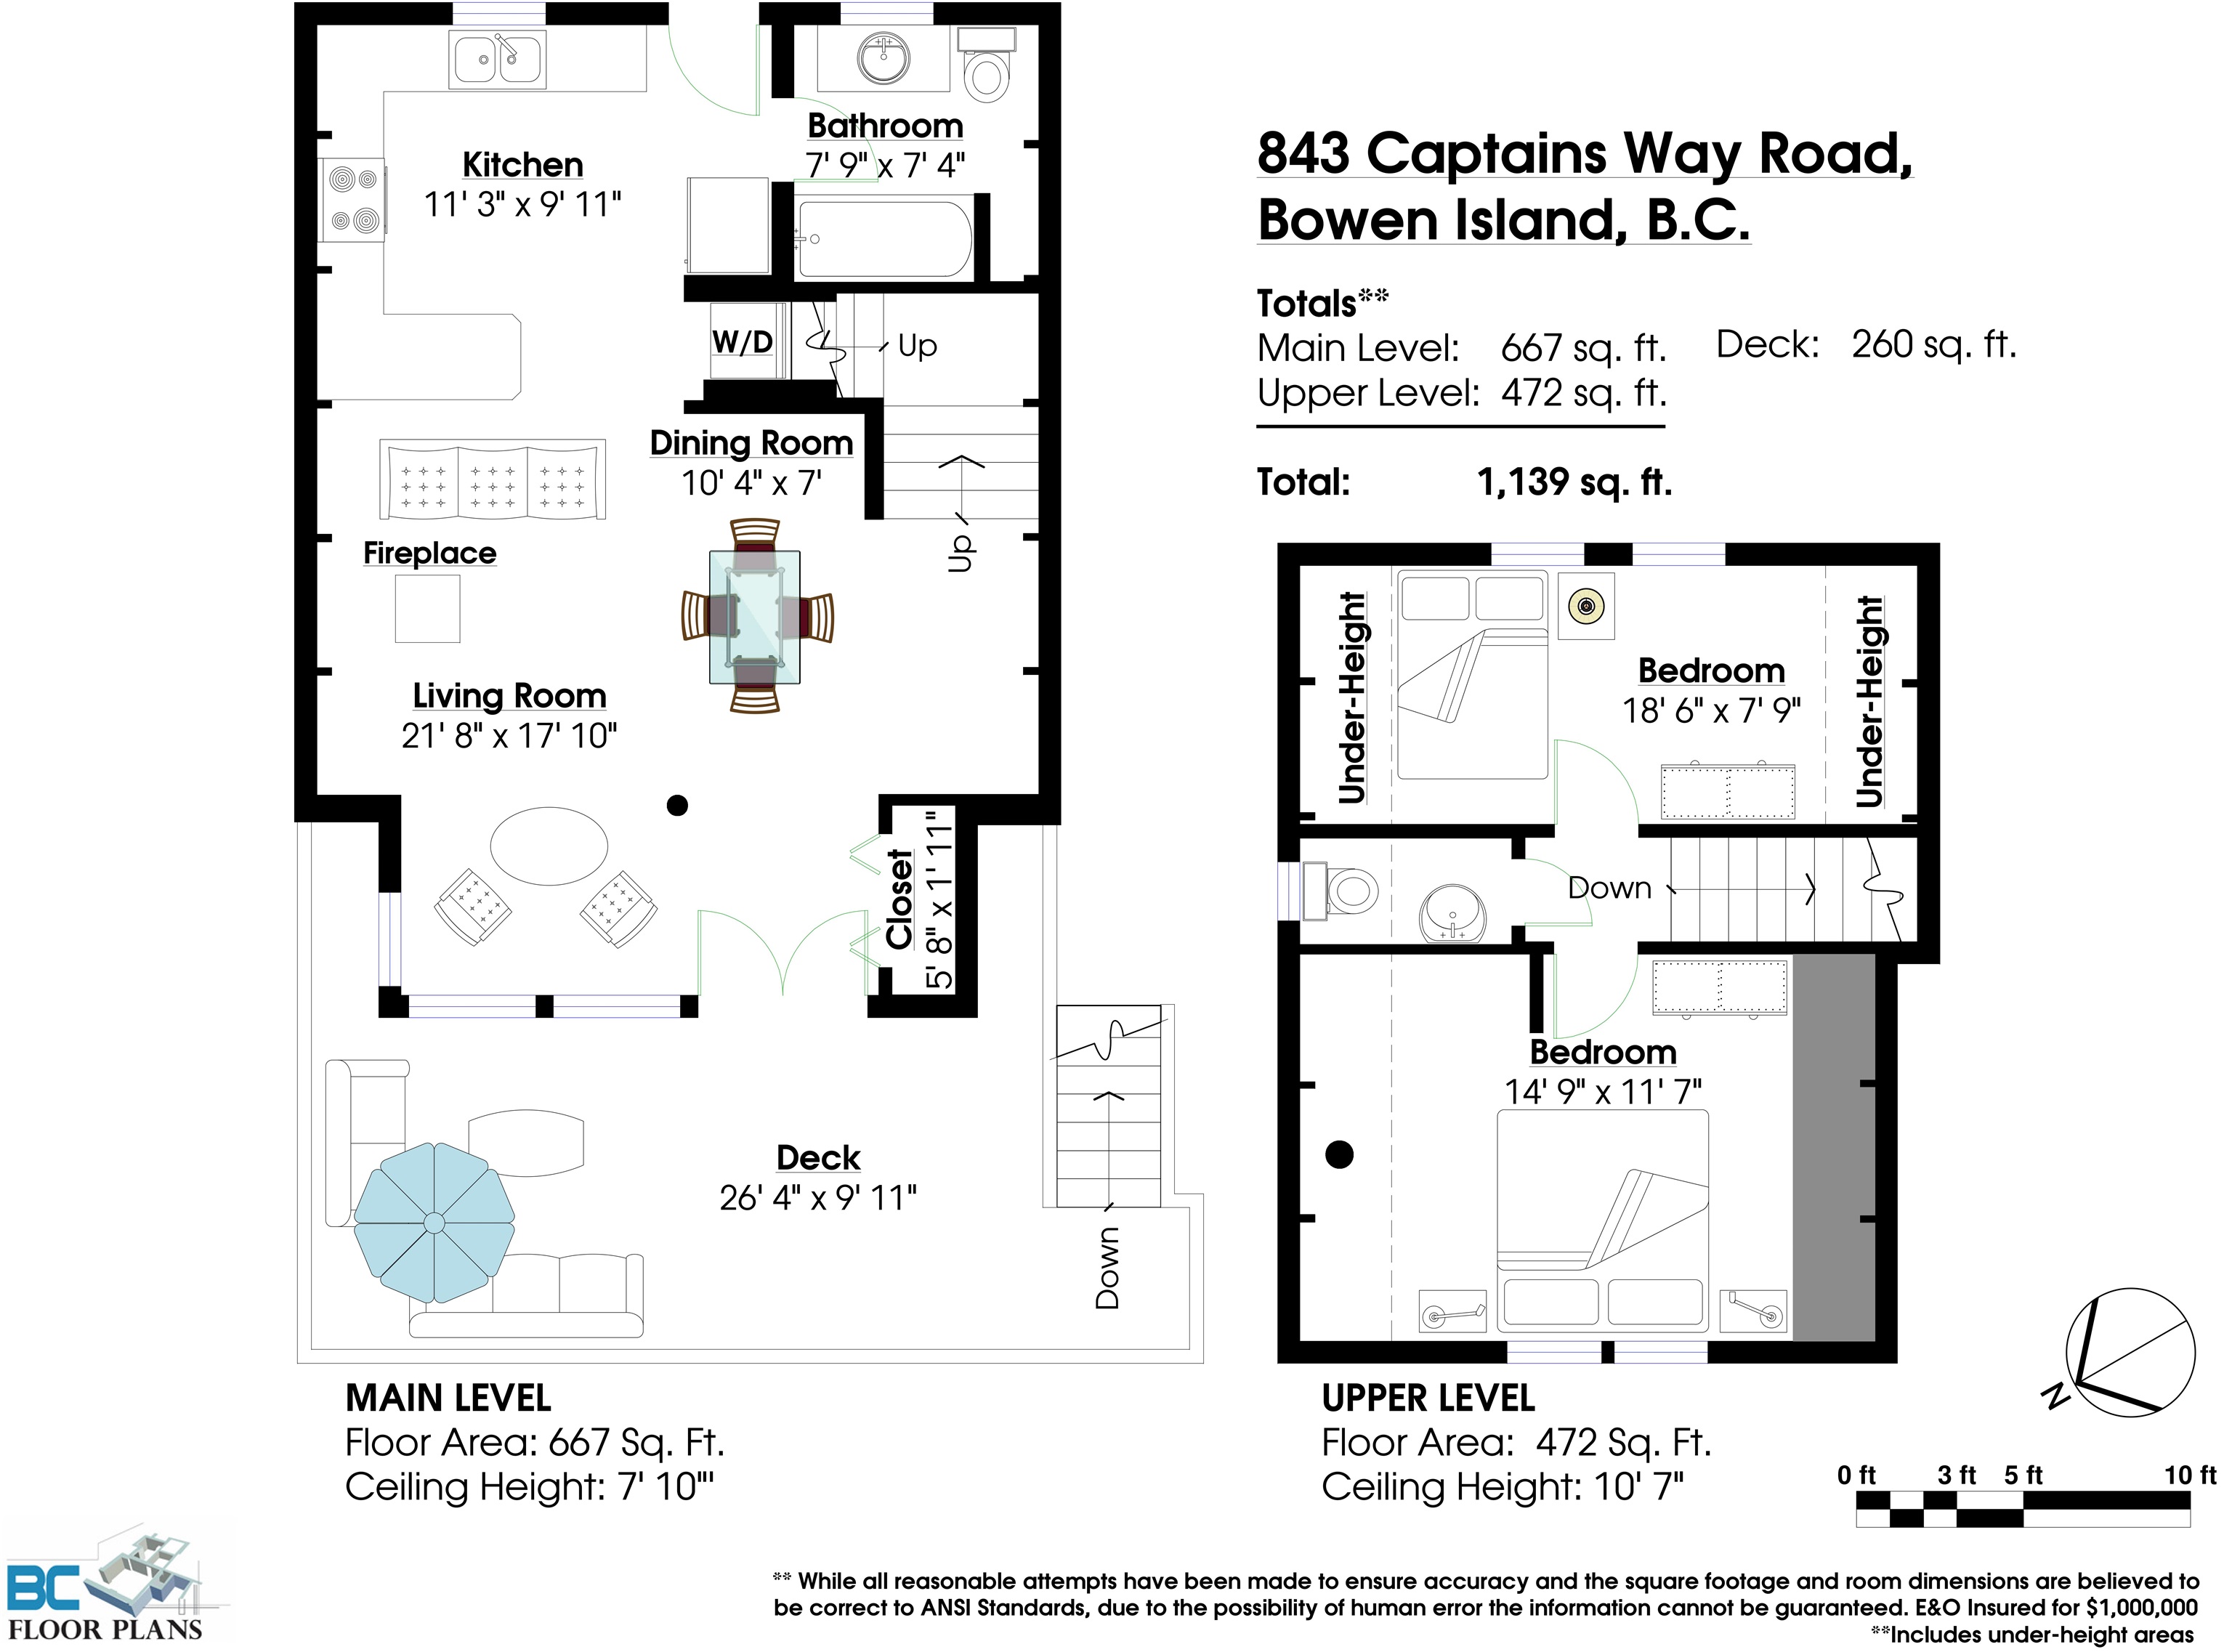 Listing image of 843 CAPTAIN'S WAY